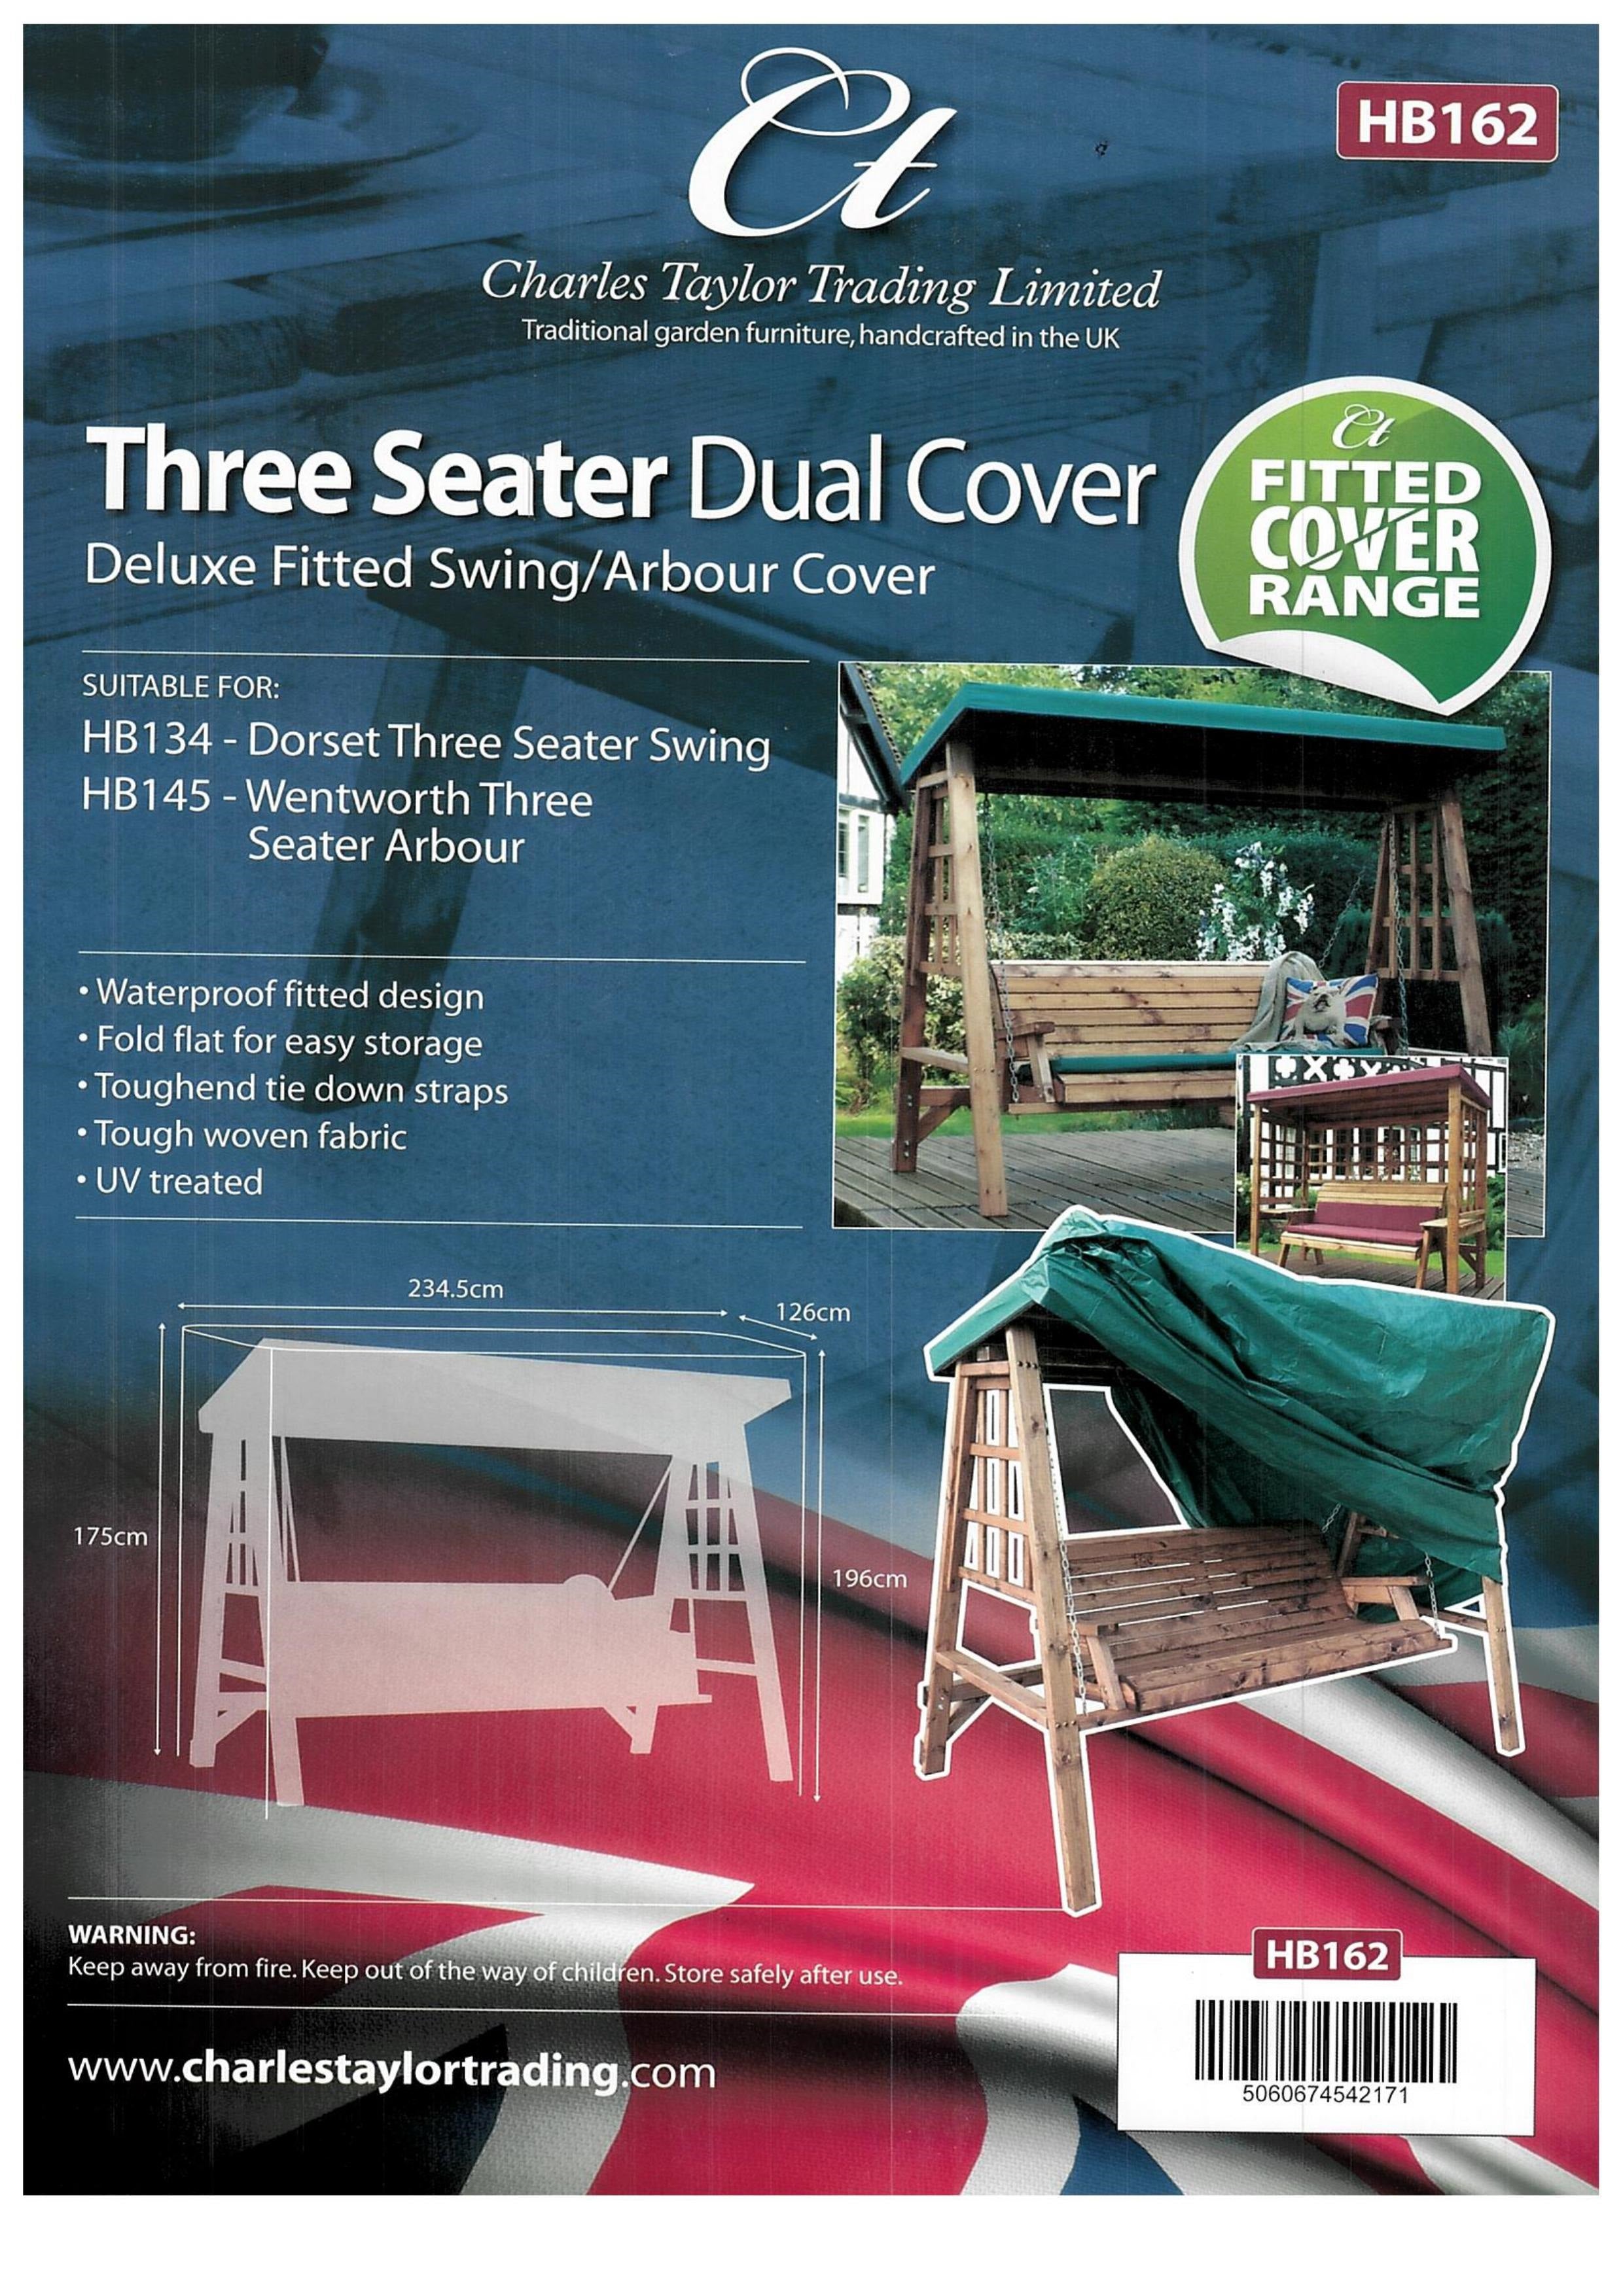 HB162 - Deluxe Fitted Three Seat Swing Cover